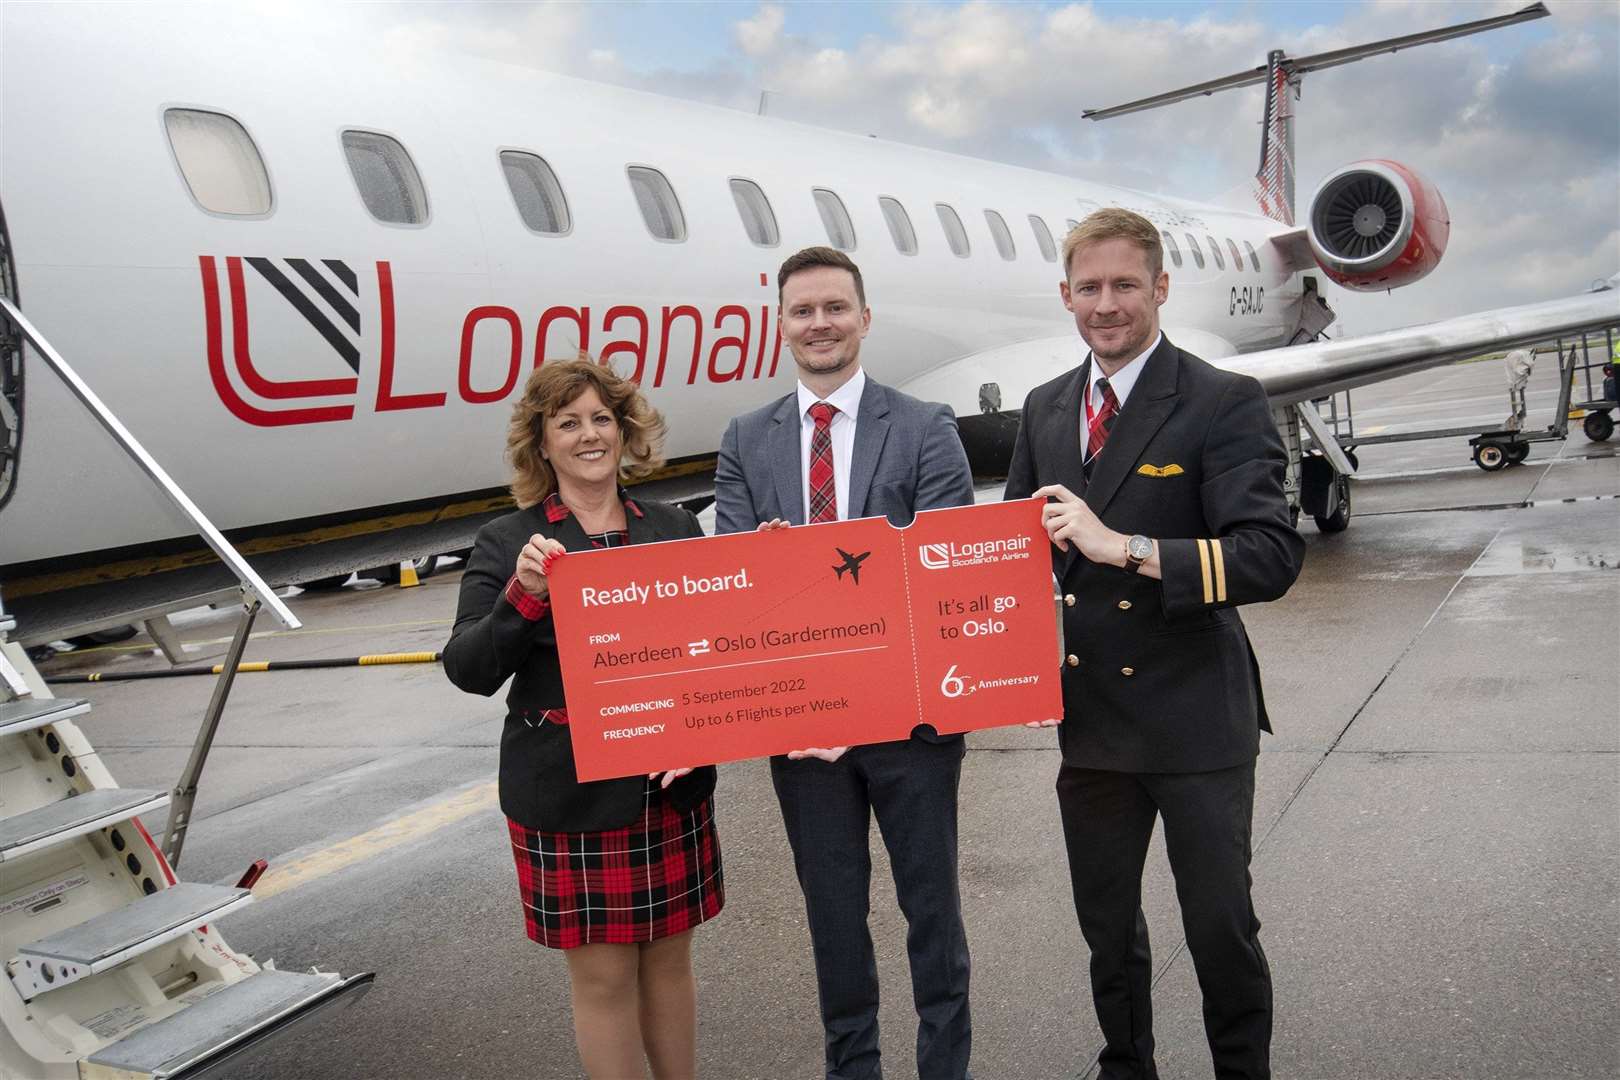 Crew member Beverly LAw (left) with CCO Loganair Luke Lovegrove and First Officer Jordan Cameron at Aberdeen Airport.